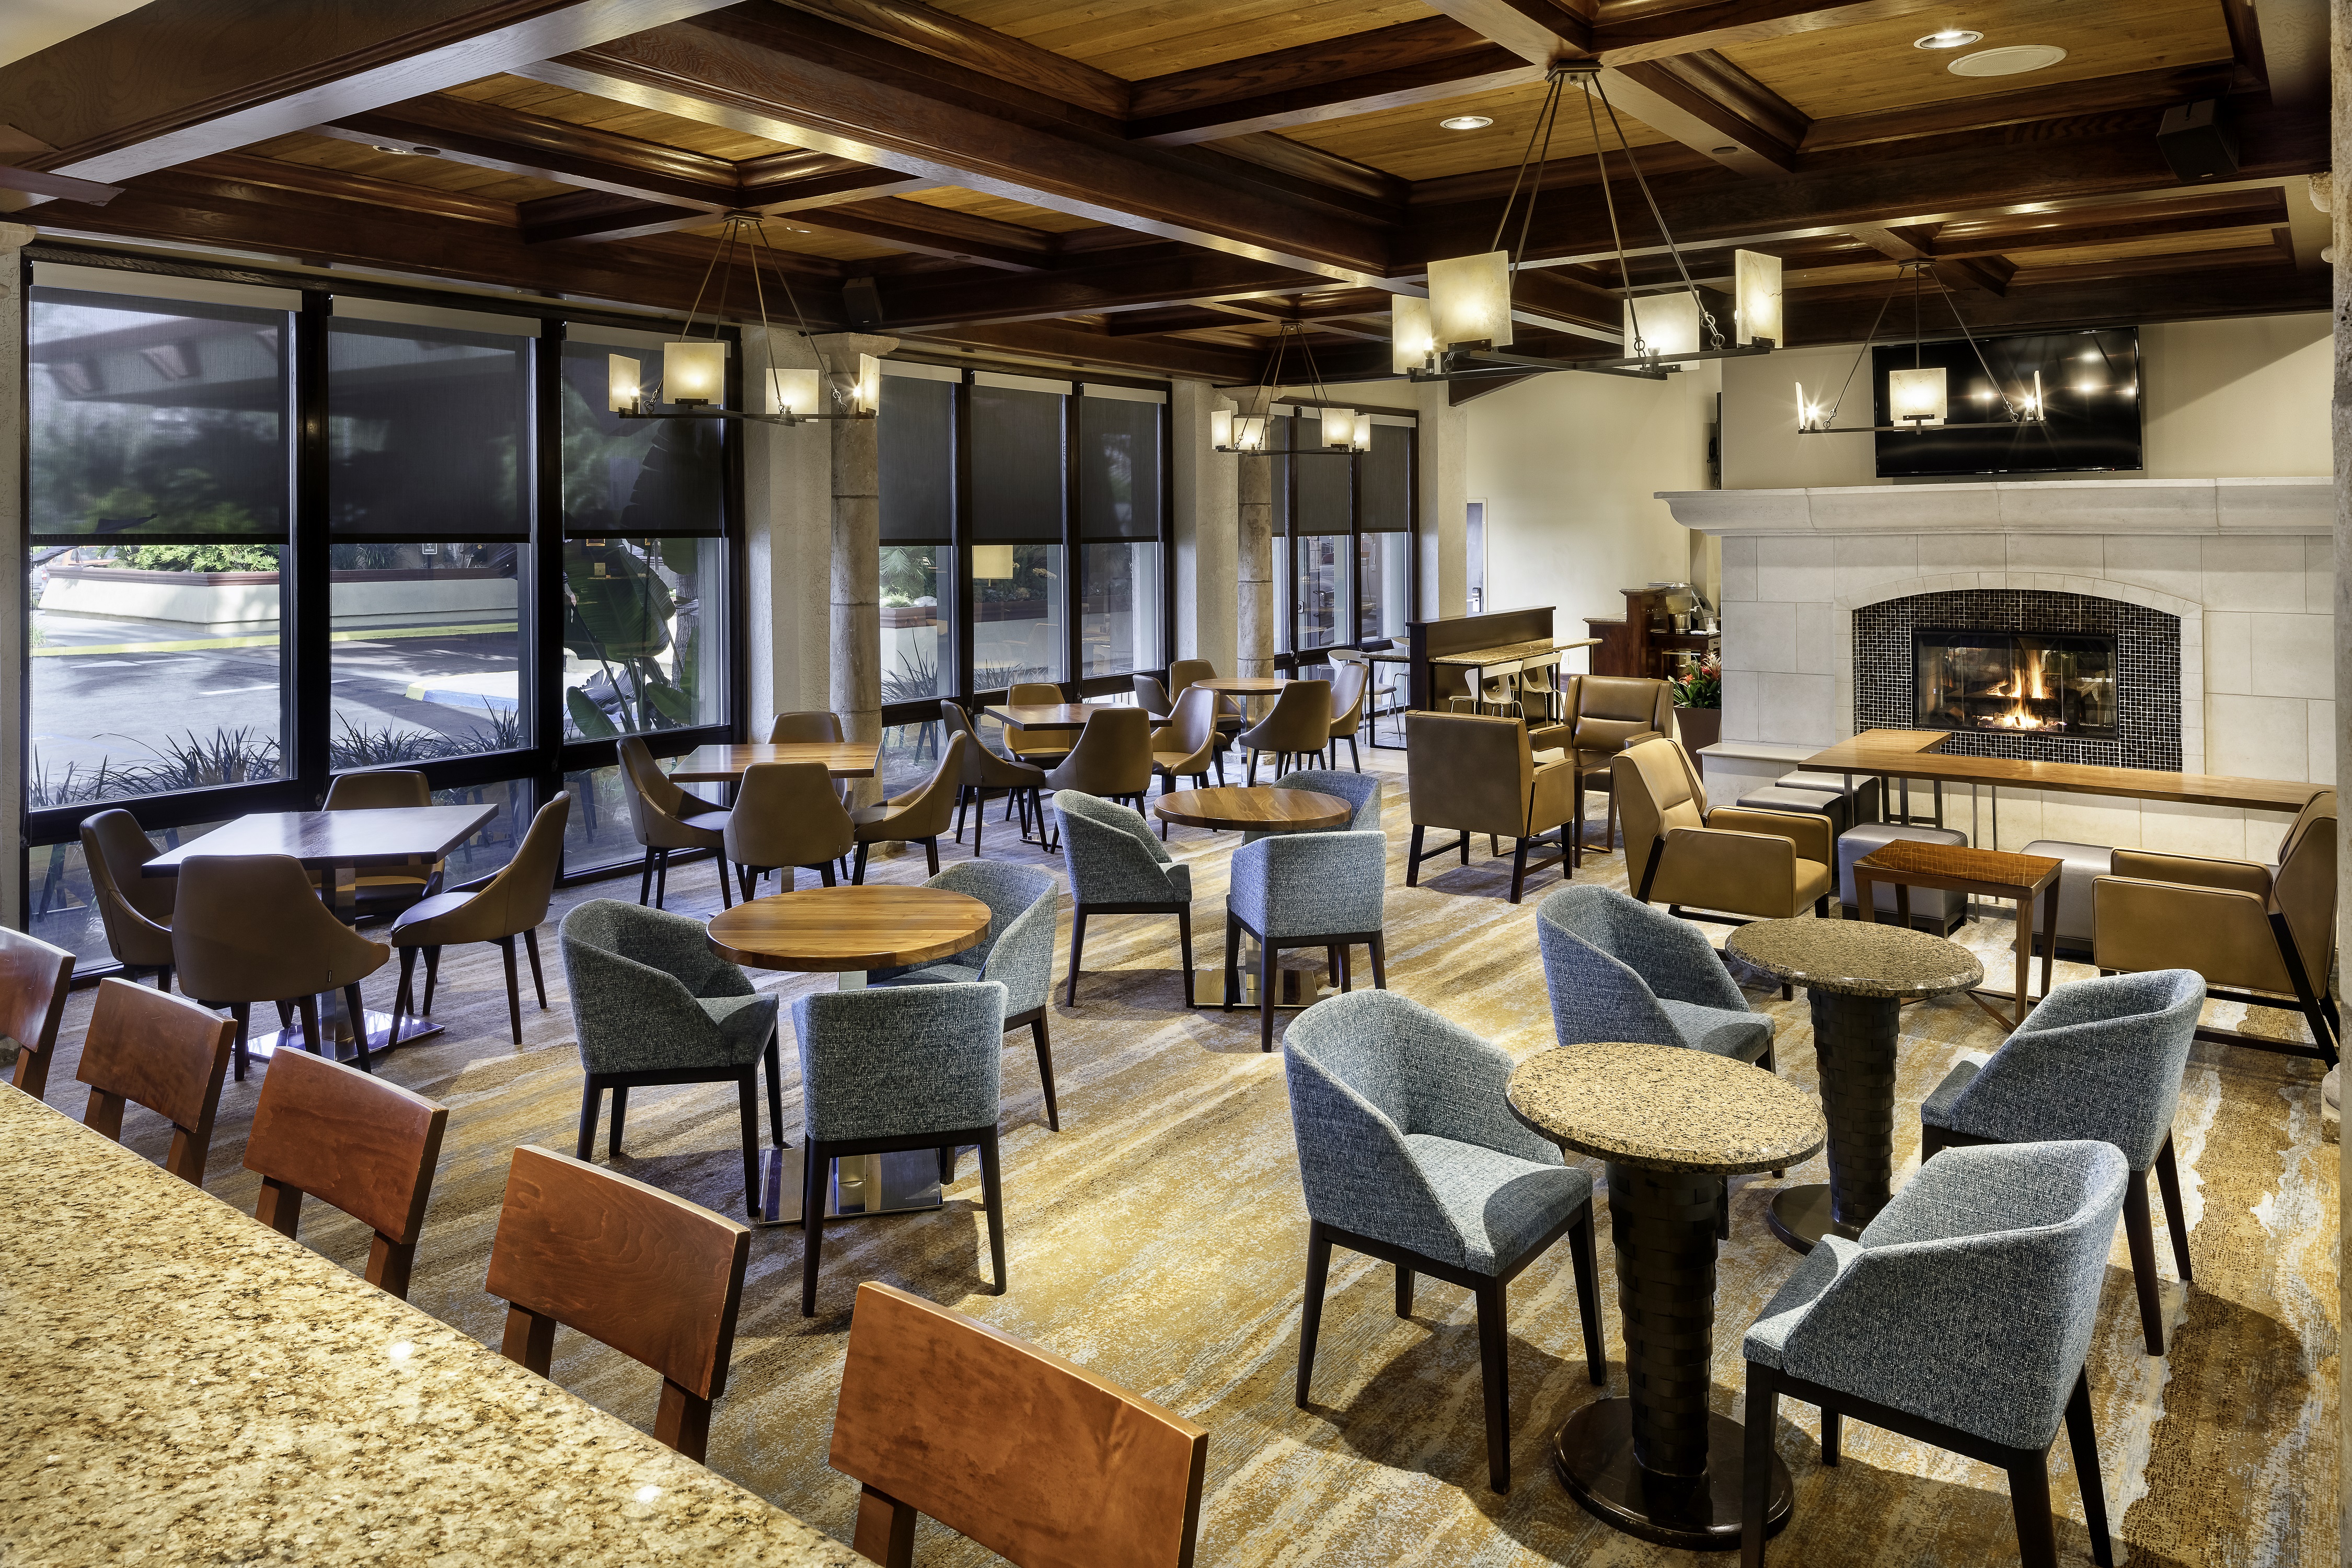 Vineyards Restaurant Dining Room Area With Tables, Mixed Seating, Large Windows, and TV Above Fireplace